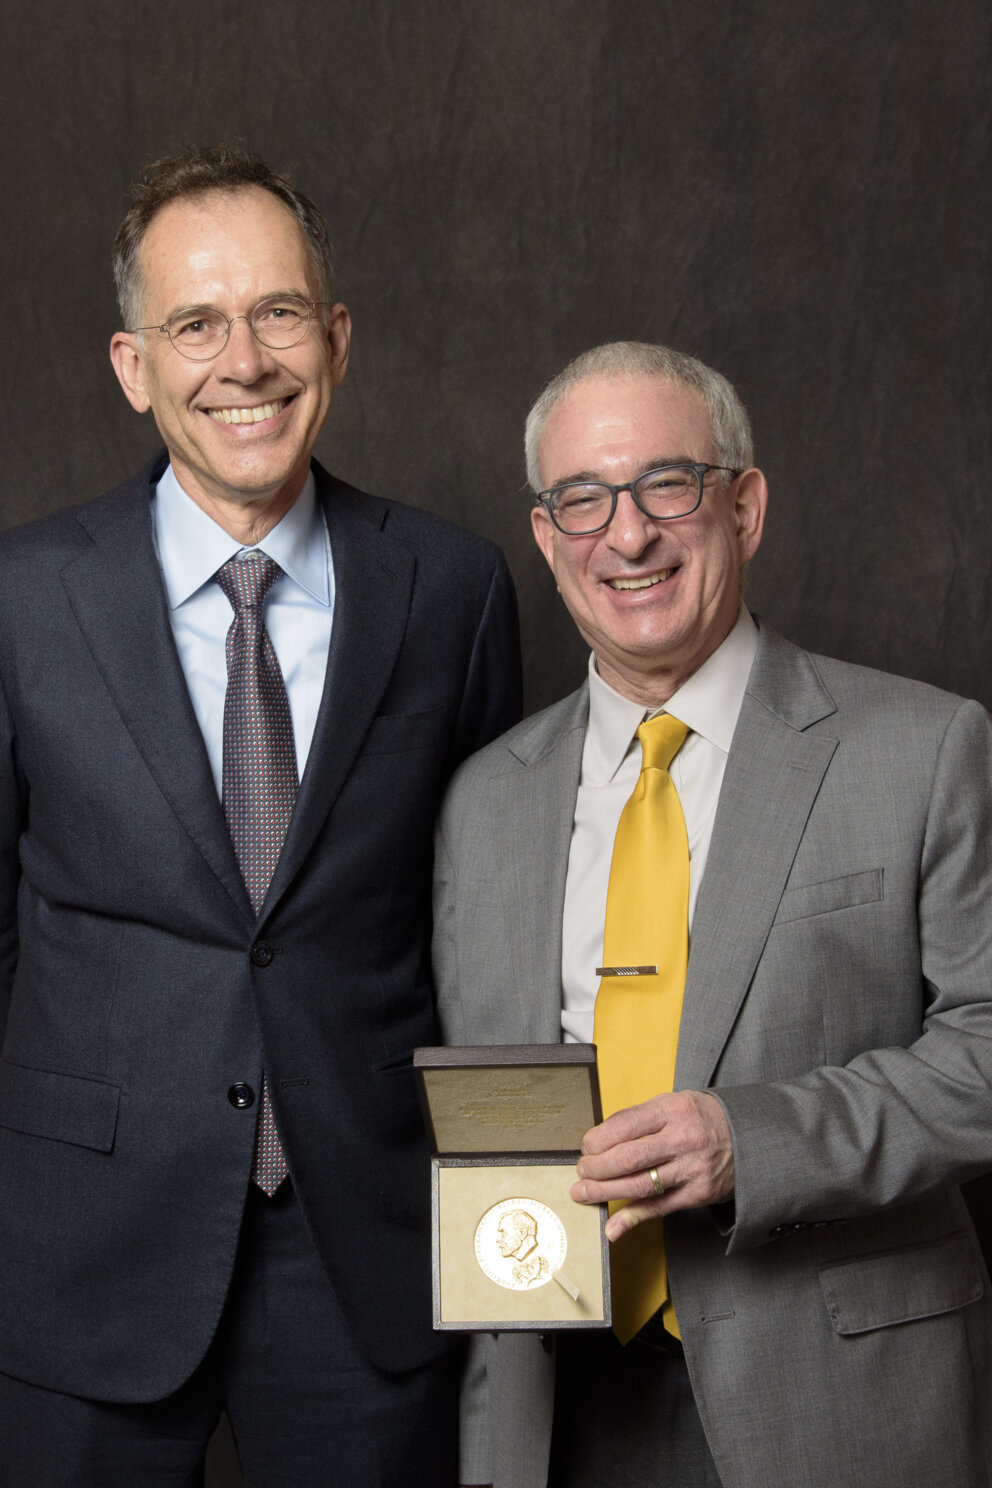 Guido Imbens and Joshua Angrist pose for a formal photo with Angrist's economic sciences prize medal